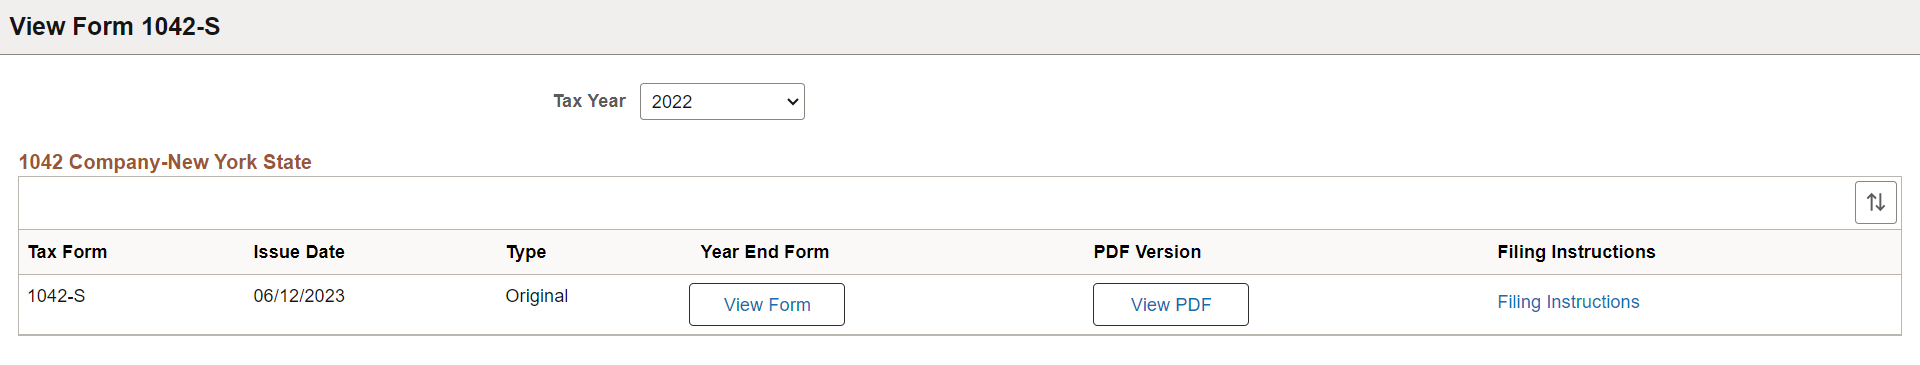 View Form 1042-S page in screen reader mode